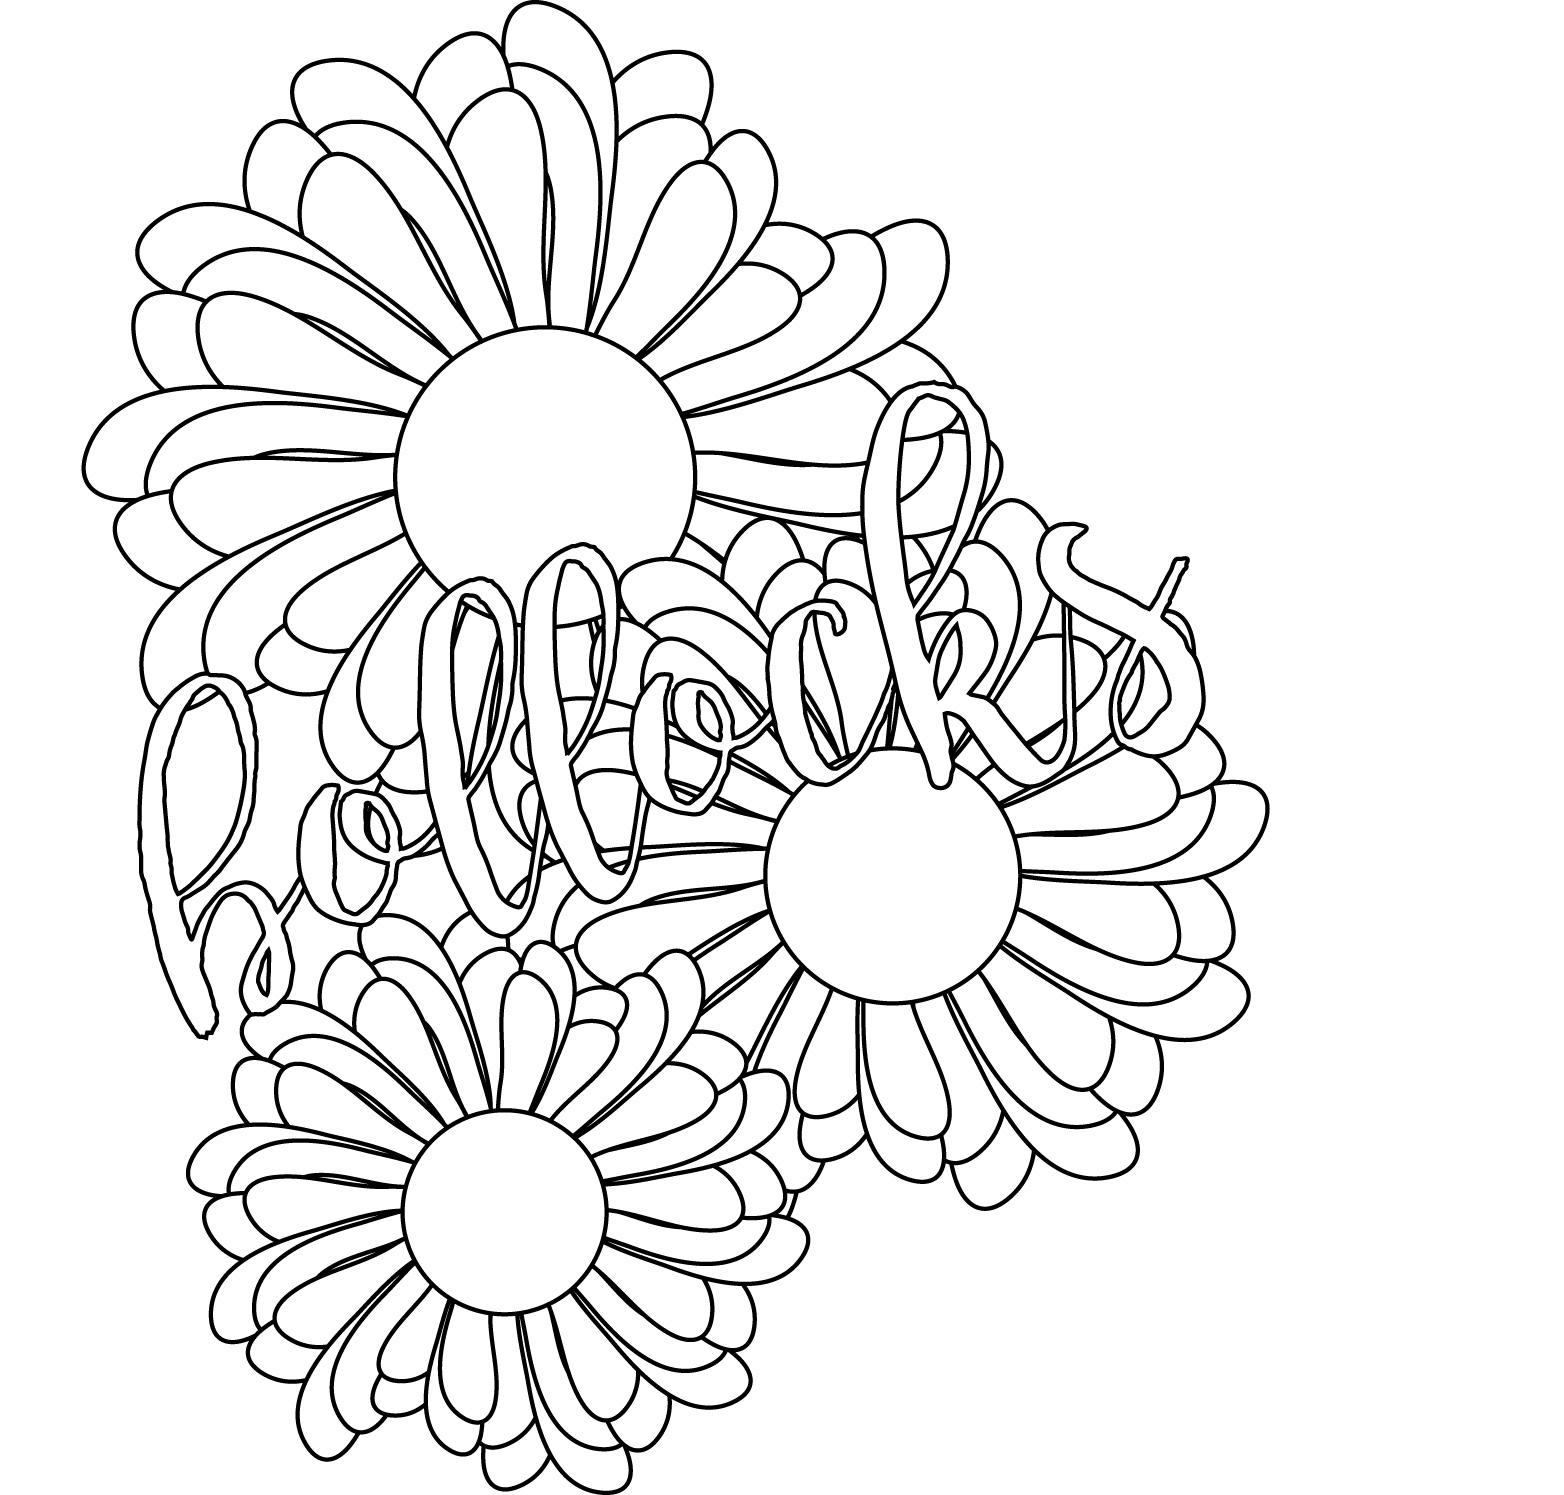 Swear words coloring book create fing amazing illustrations r